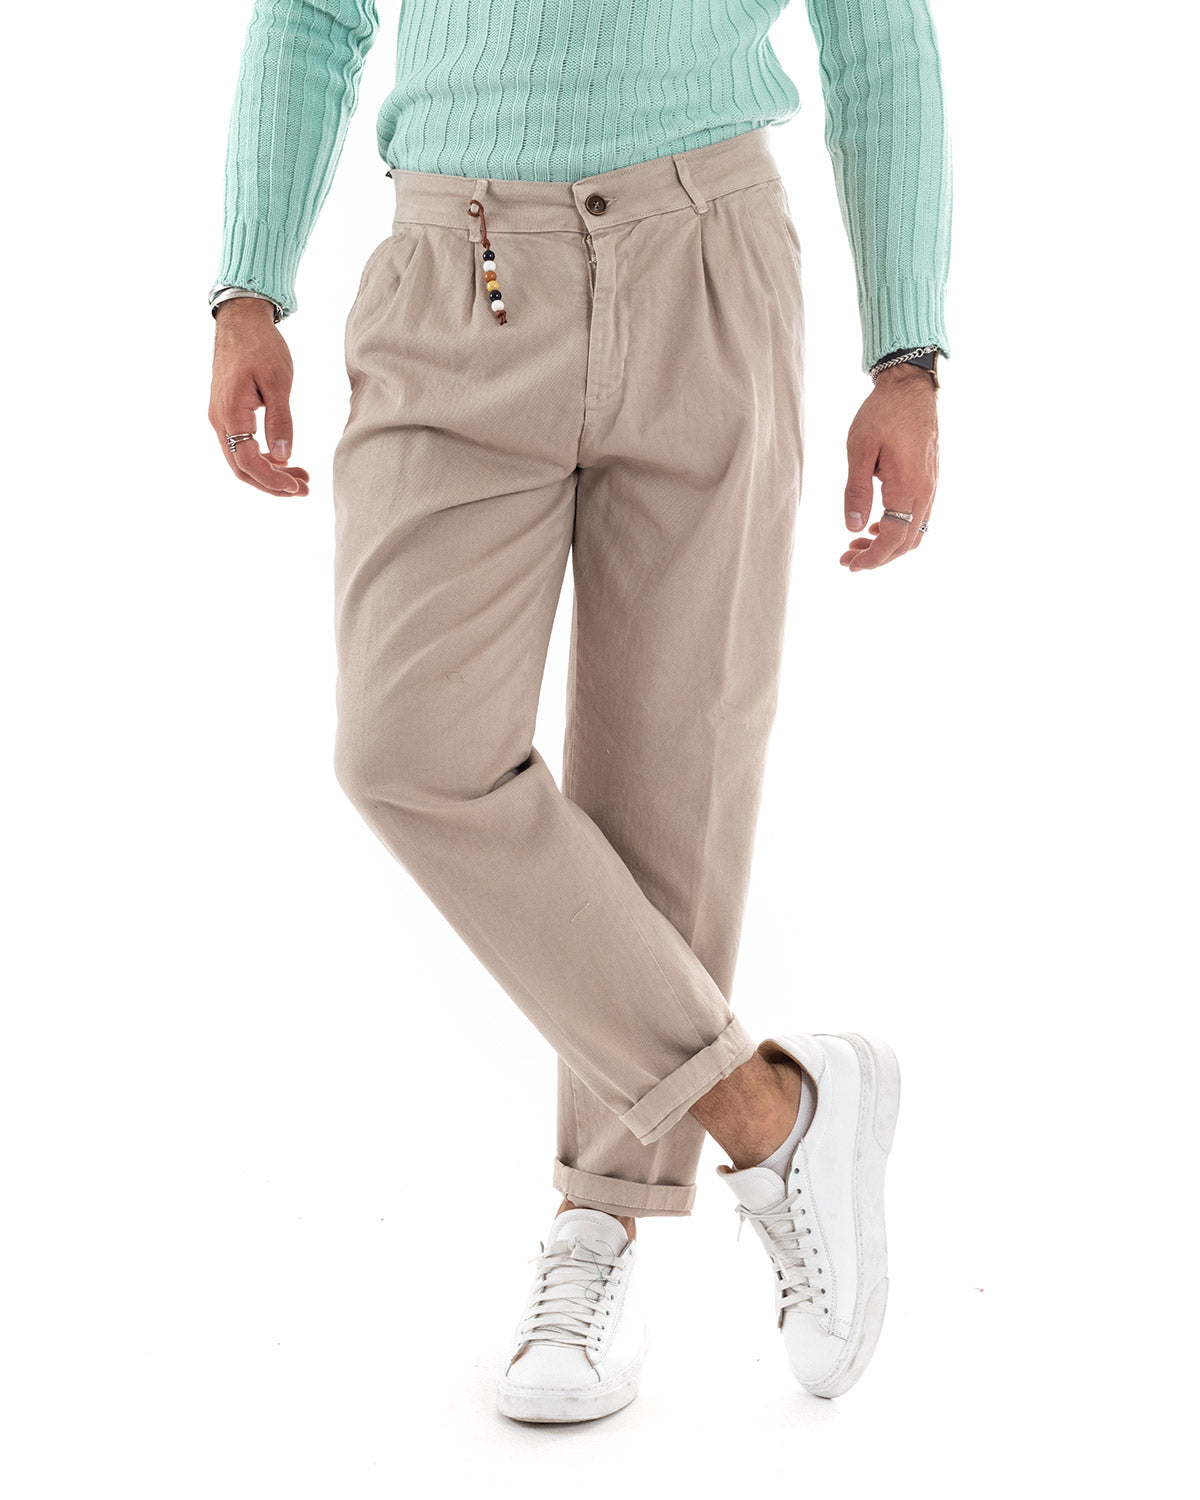 Men's Jeans Trousers Loose Fit With Pleats Beige Casual GIOSAL-P5535A